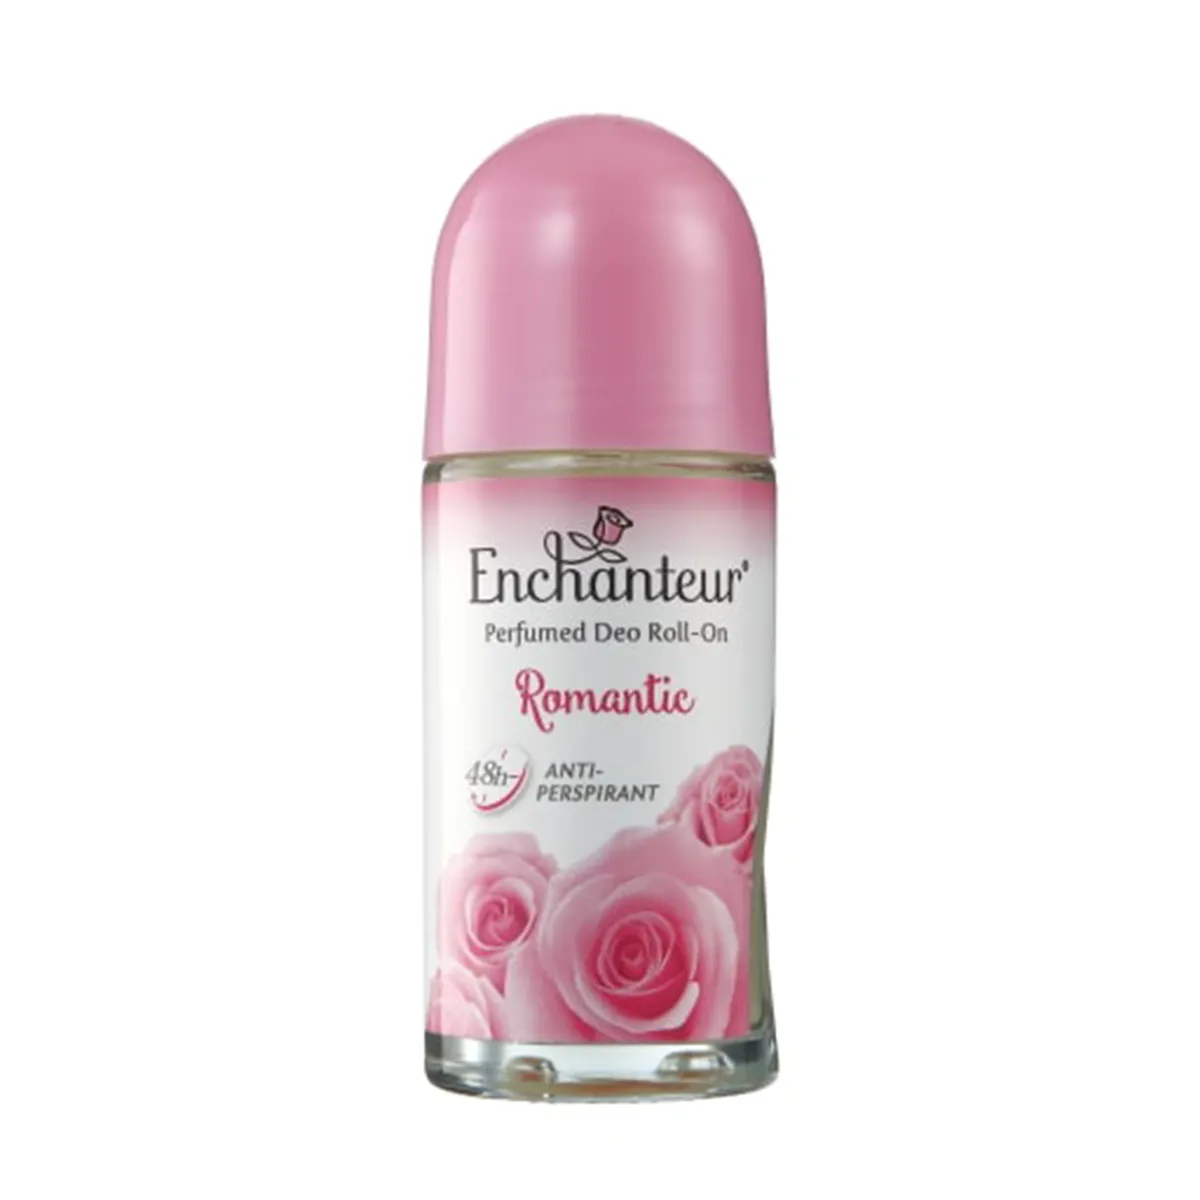 First product image of Enchanteur Romantic Perfumed Deo Roll On - 50ml